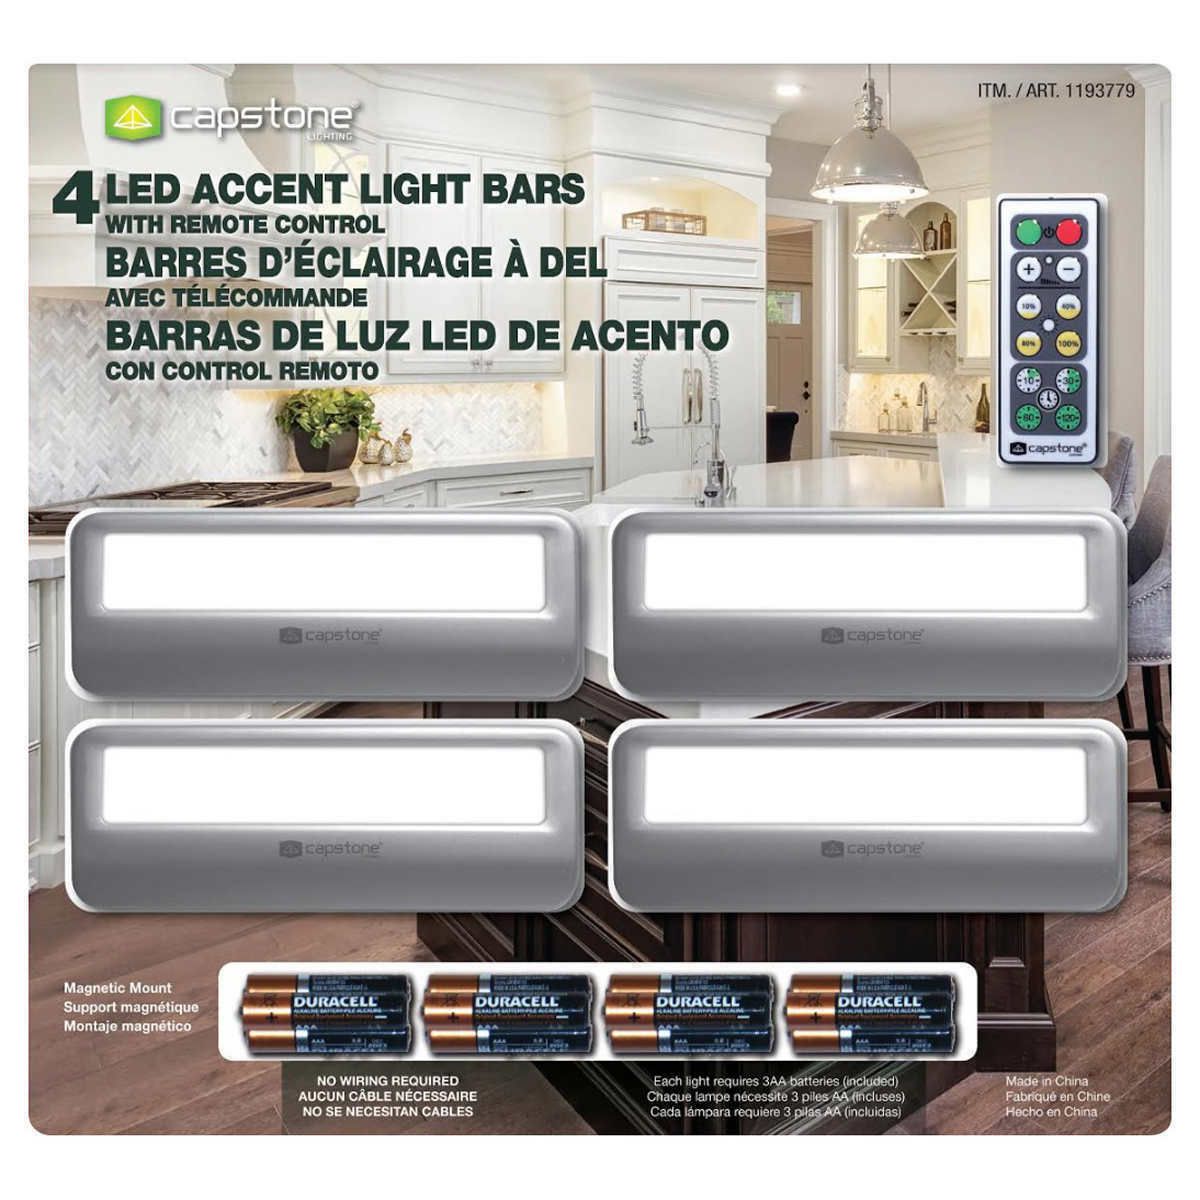 4x CAPSTONE LED Accent Light Bars with Remote control Battery operated NEW